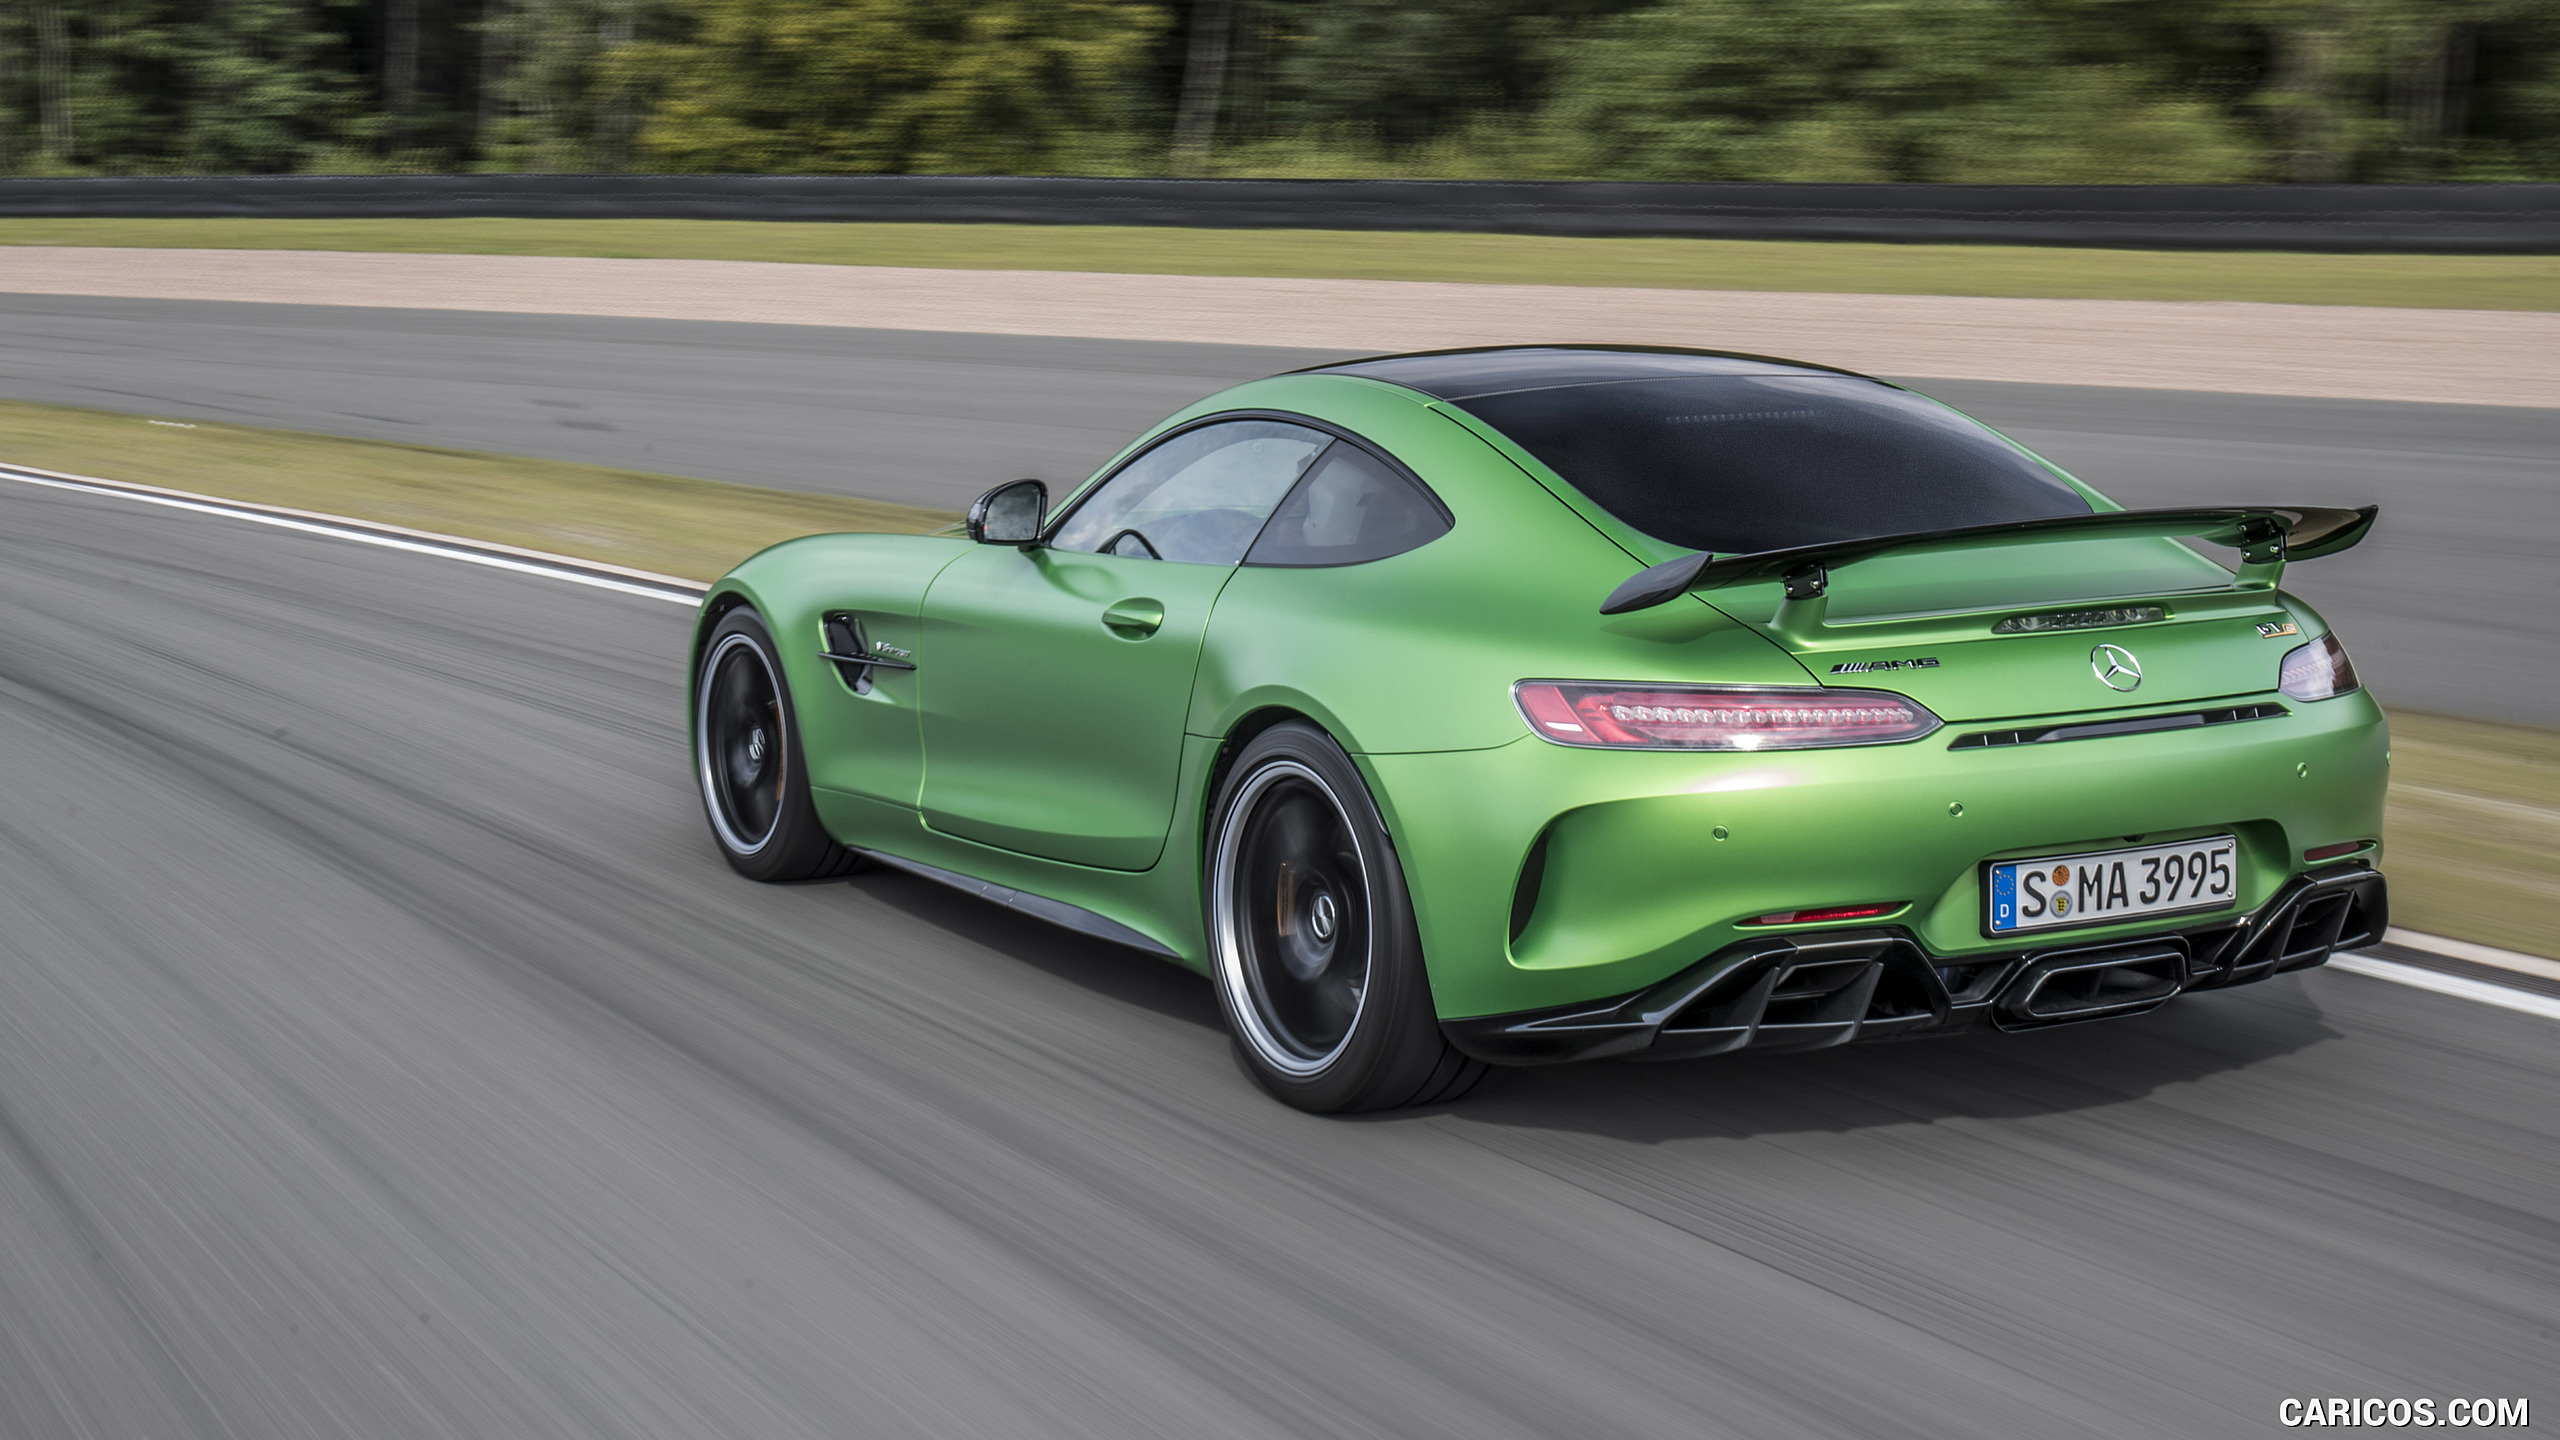 2017 Mercedes-AMG GT R Coupe - Rear Three-Quarter, #166 of 182